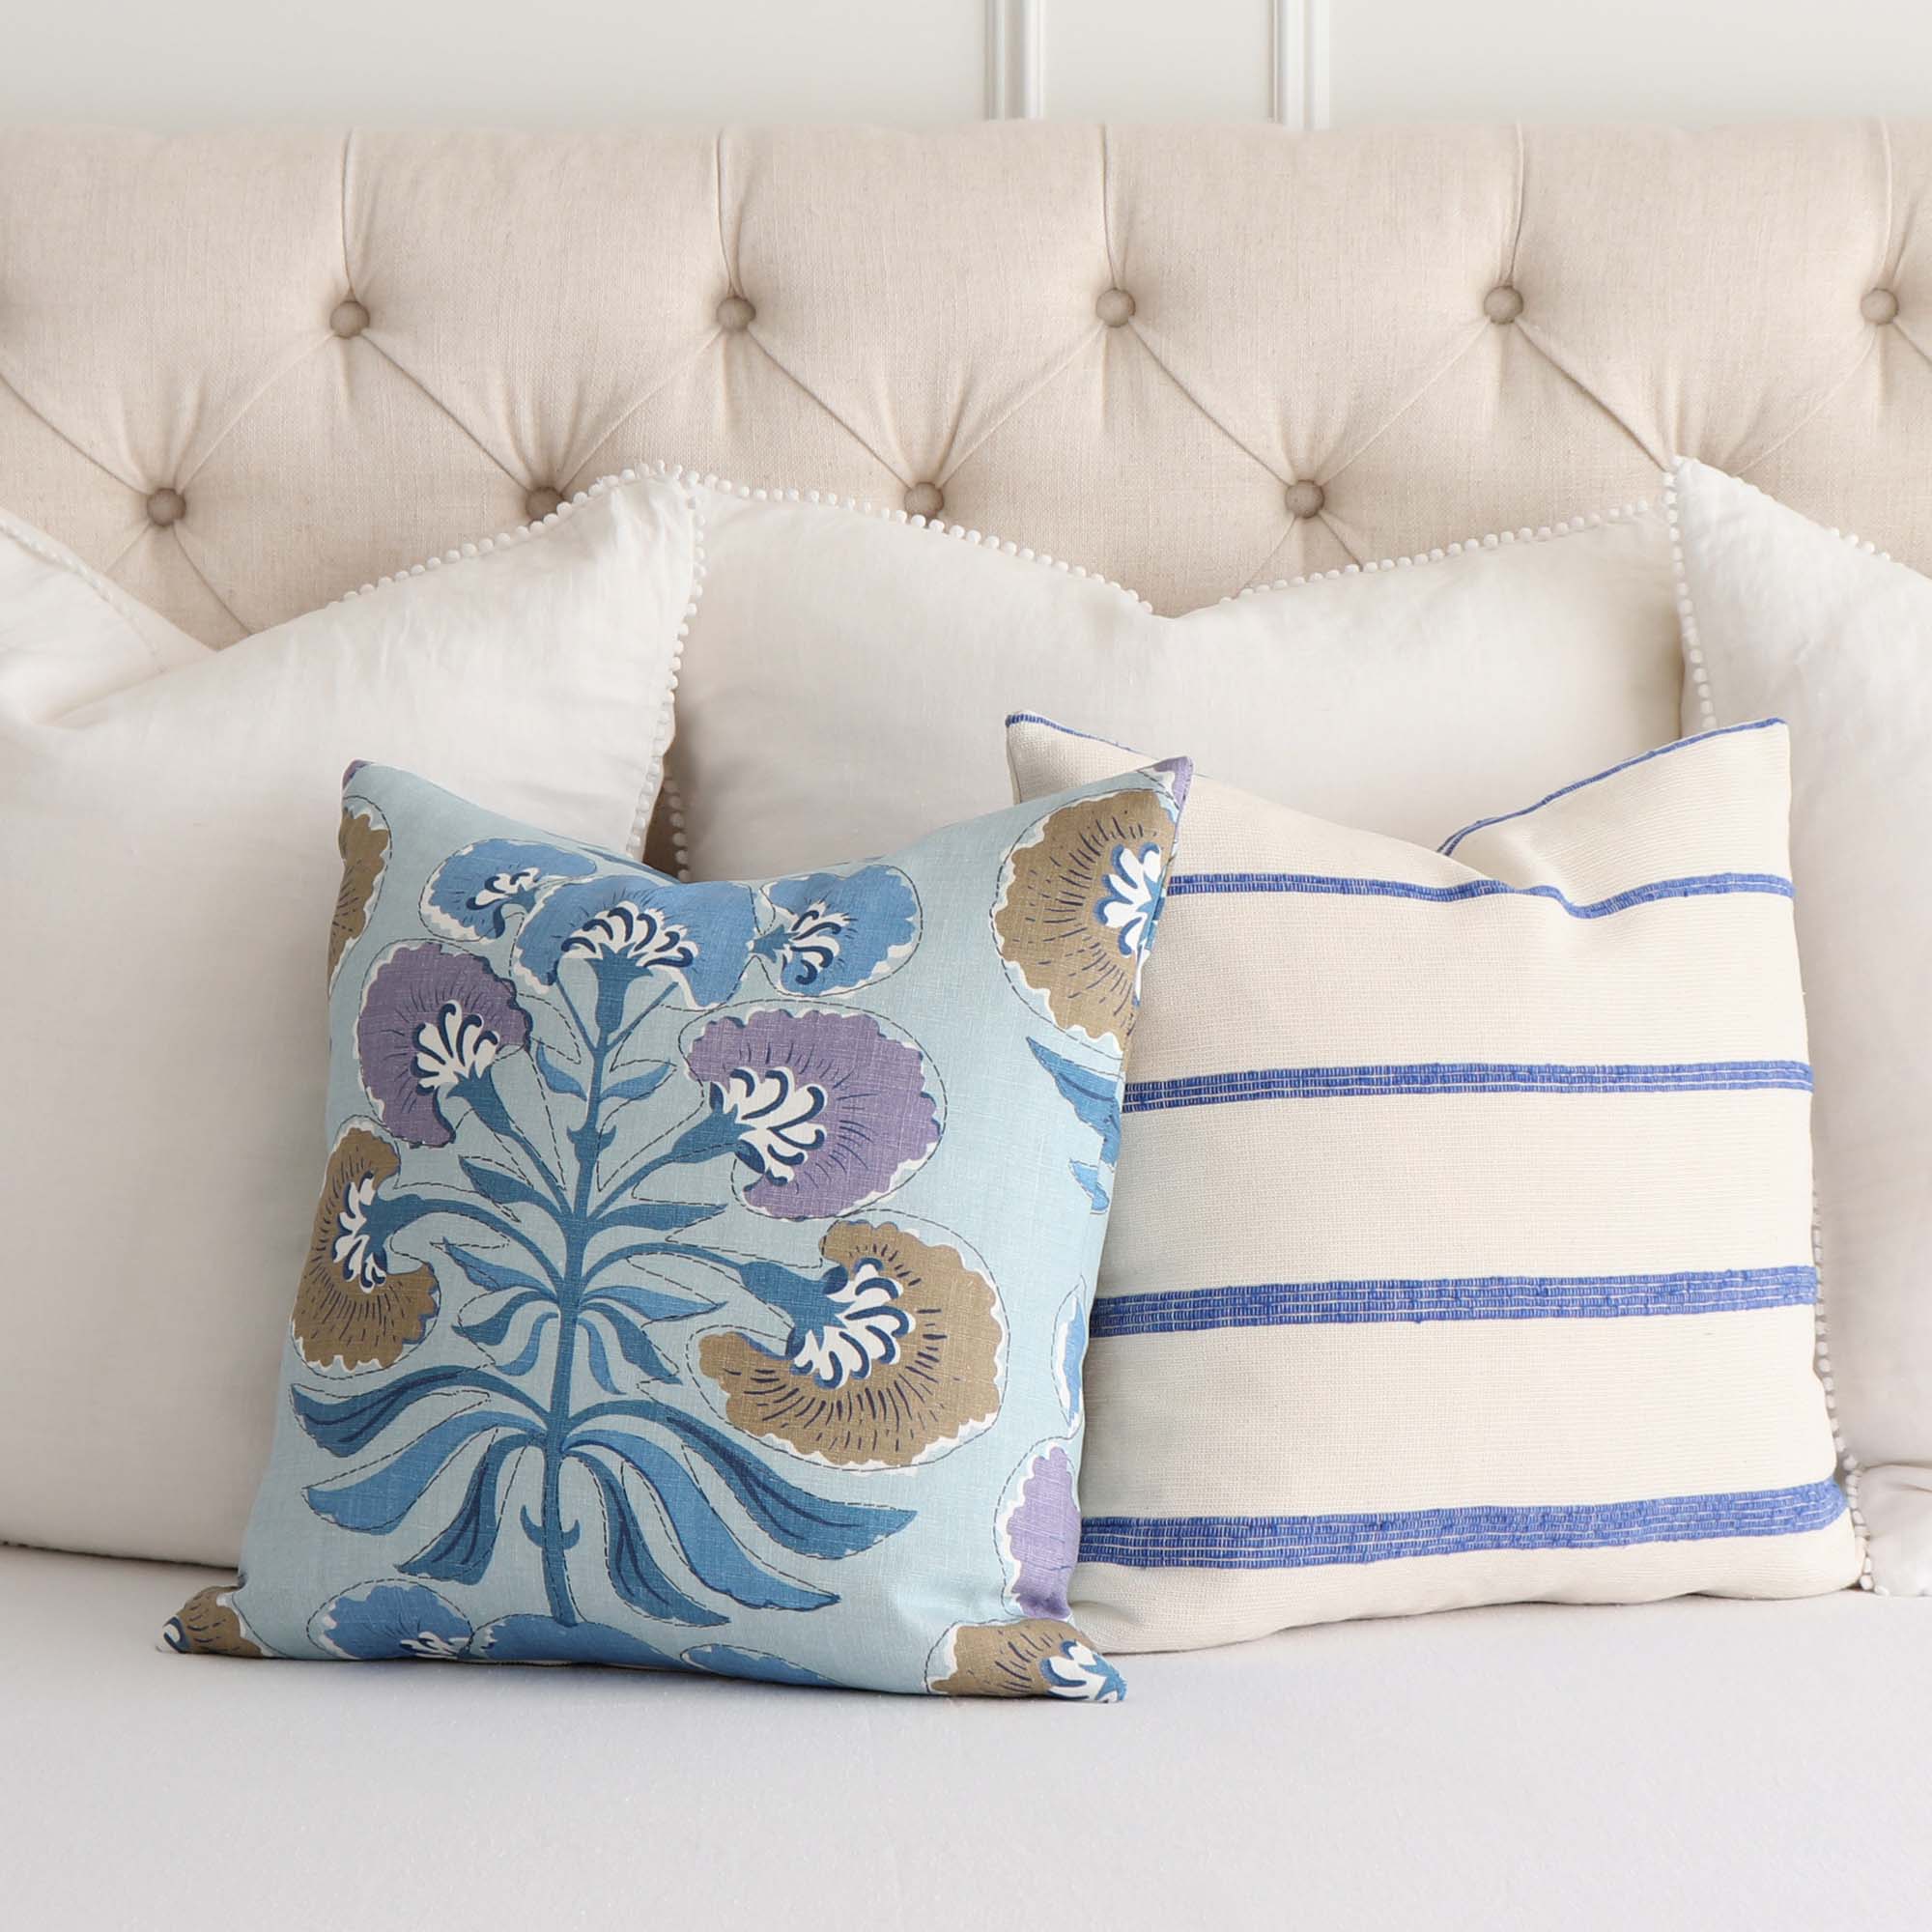 Thibaut Tybee Tree Lavender Purple Blue Floral Block Print Designer Linen Decorative Throw Pillow Cover with Matching Throw Pillow on Bed